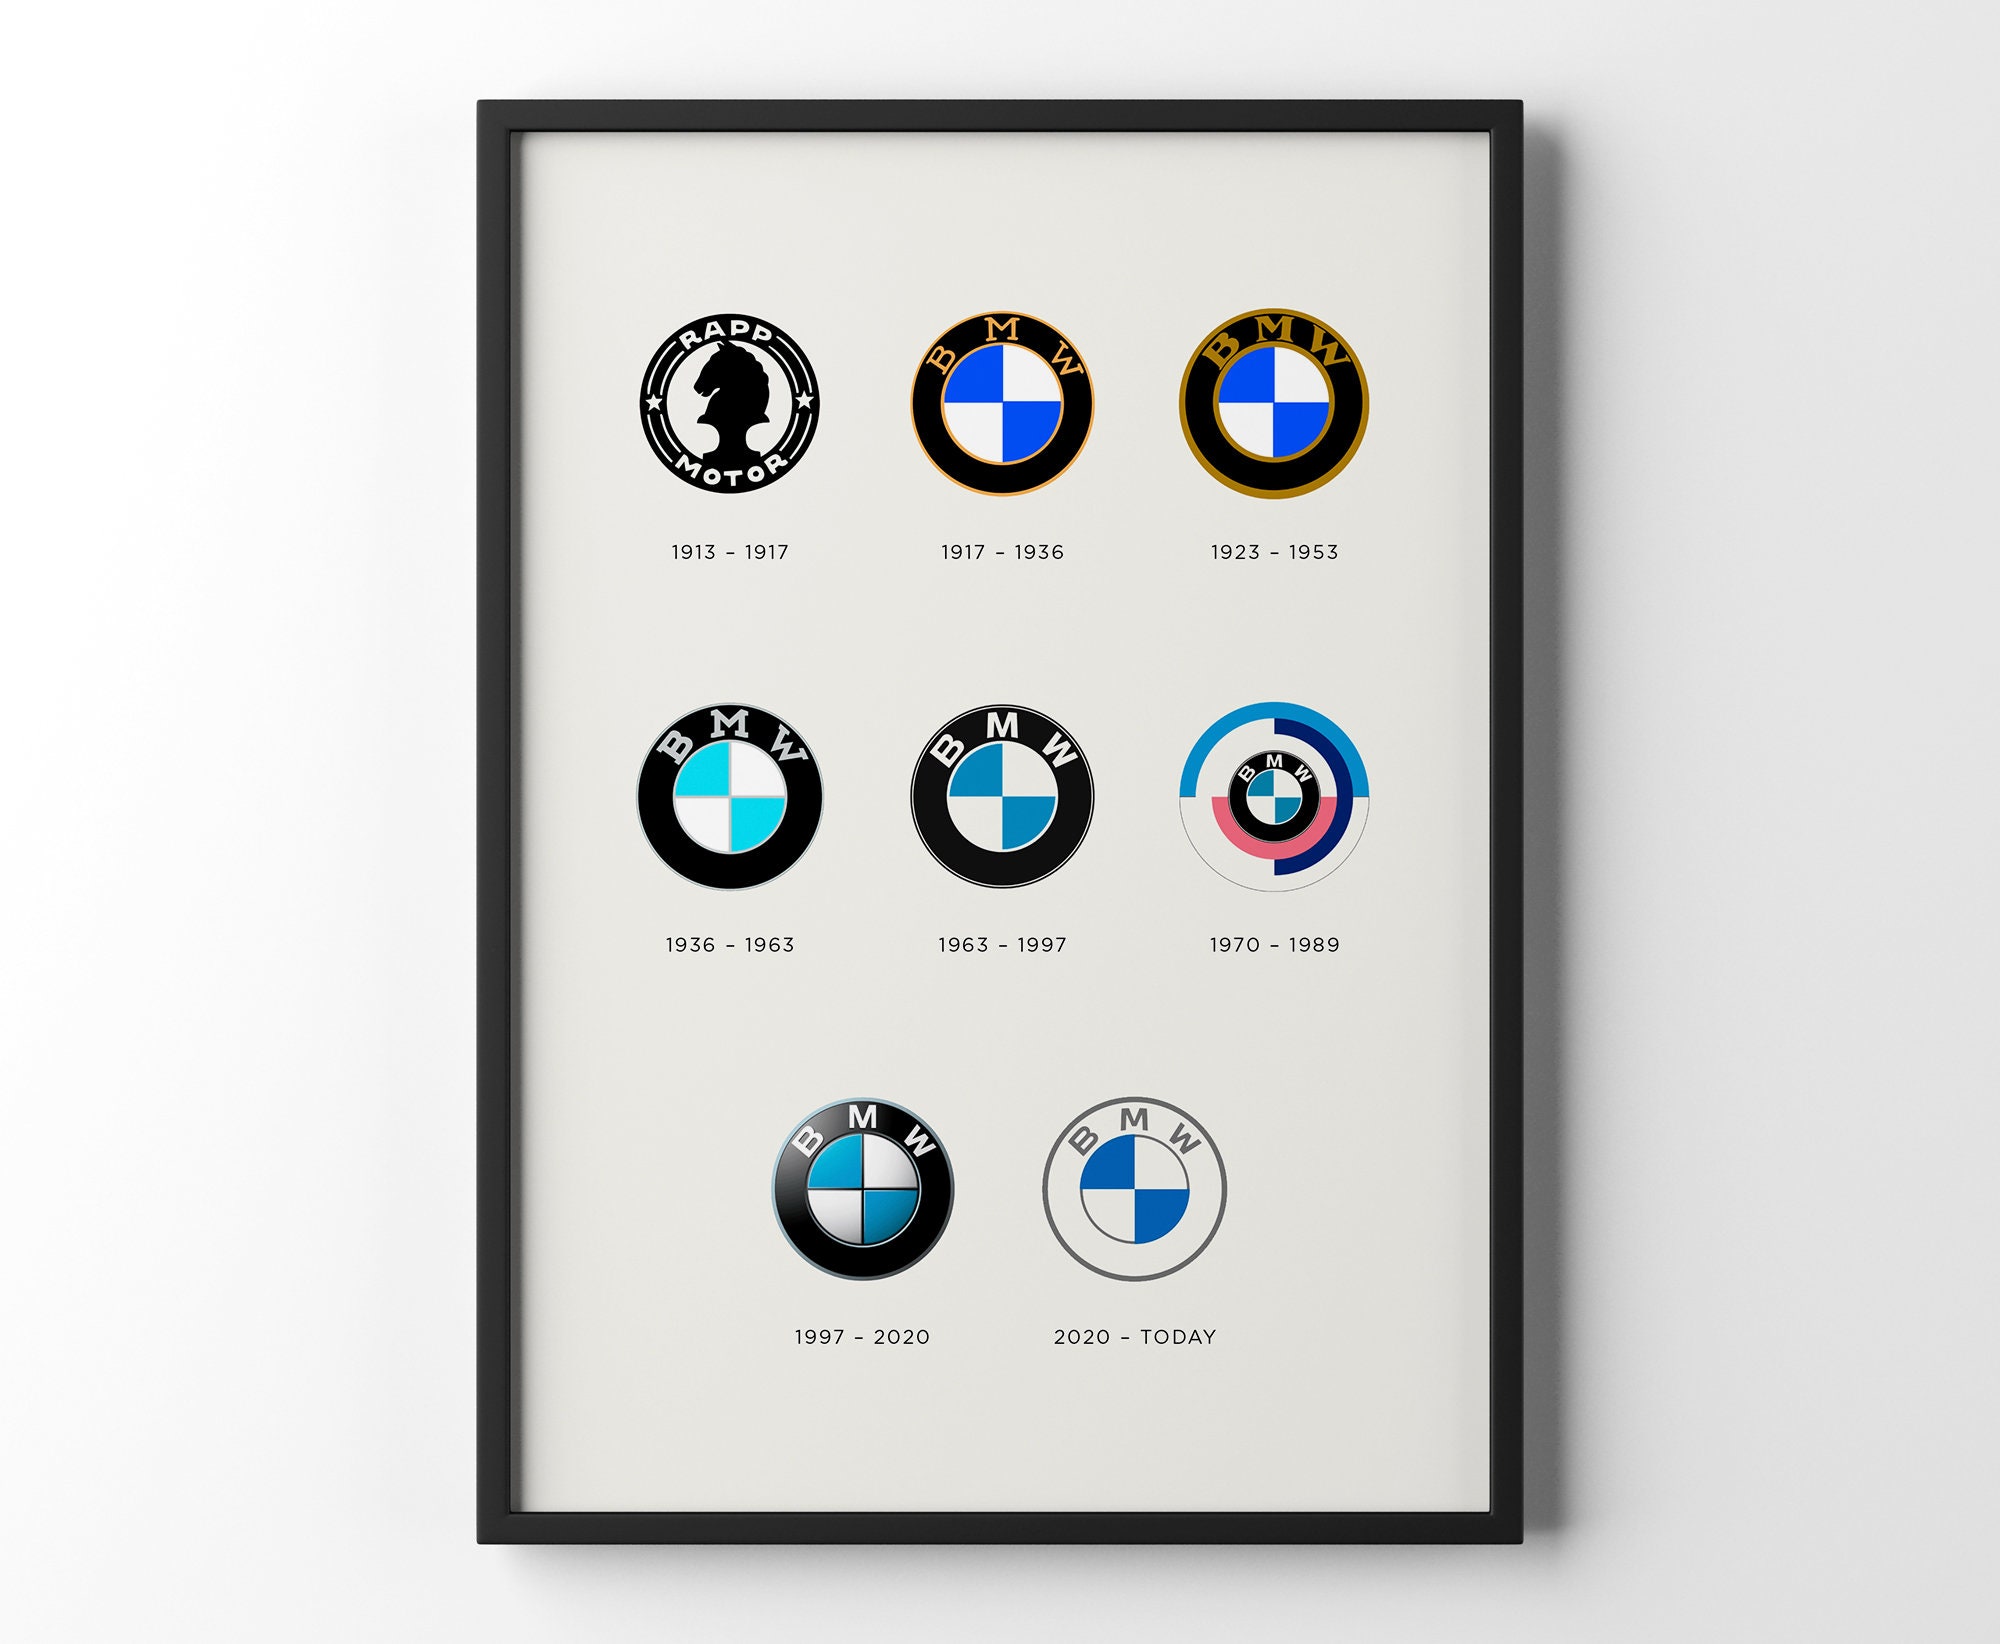 Life Is Too Short, BMW Gifts Tshirt, Car Gifts for Him, Car Guy Gifts, Car Lover Gifts, Car Gifts for Men, Car Enthusiast Gifts